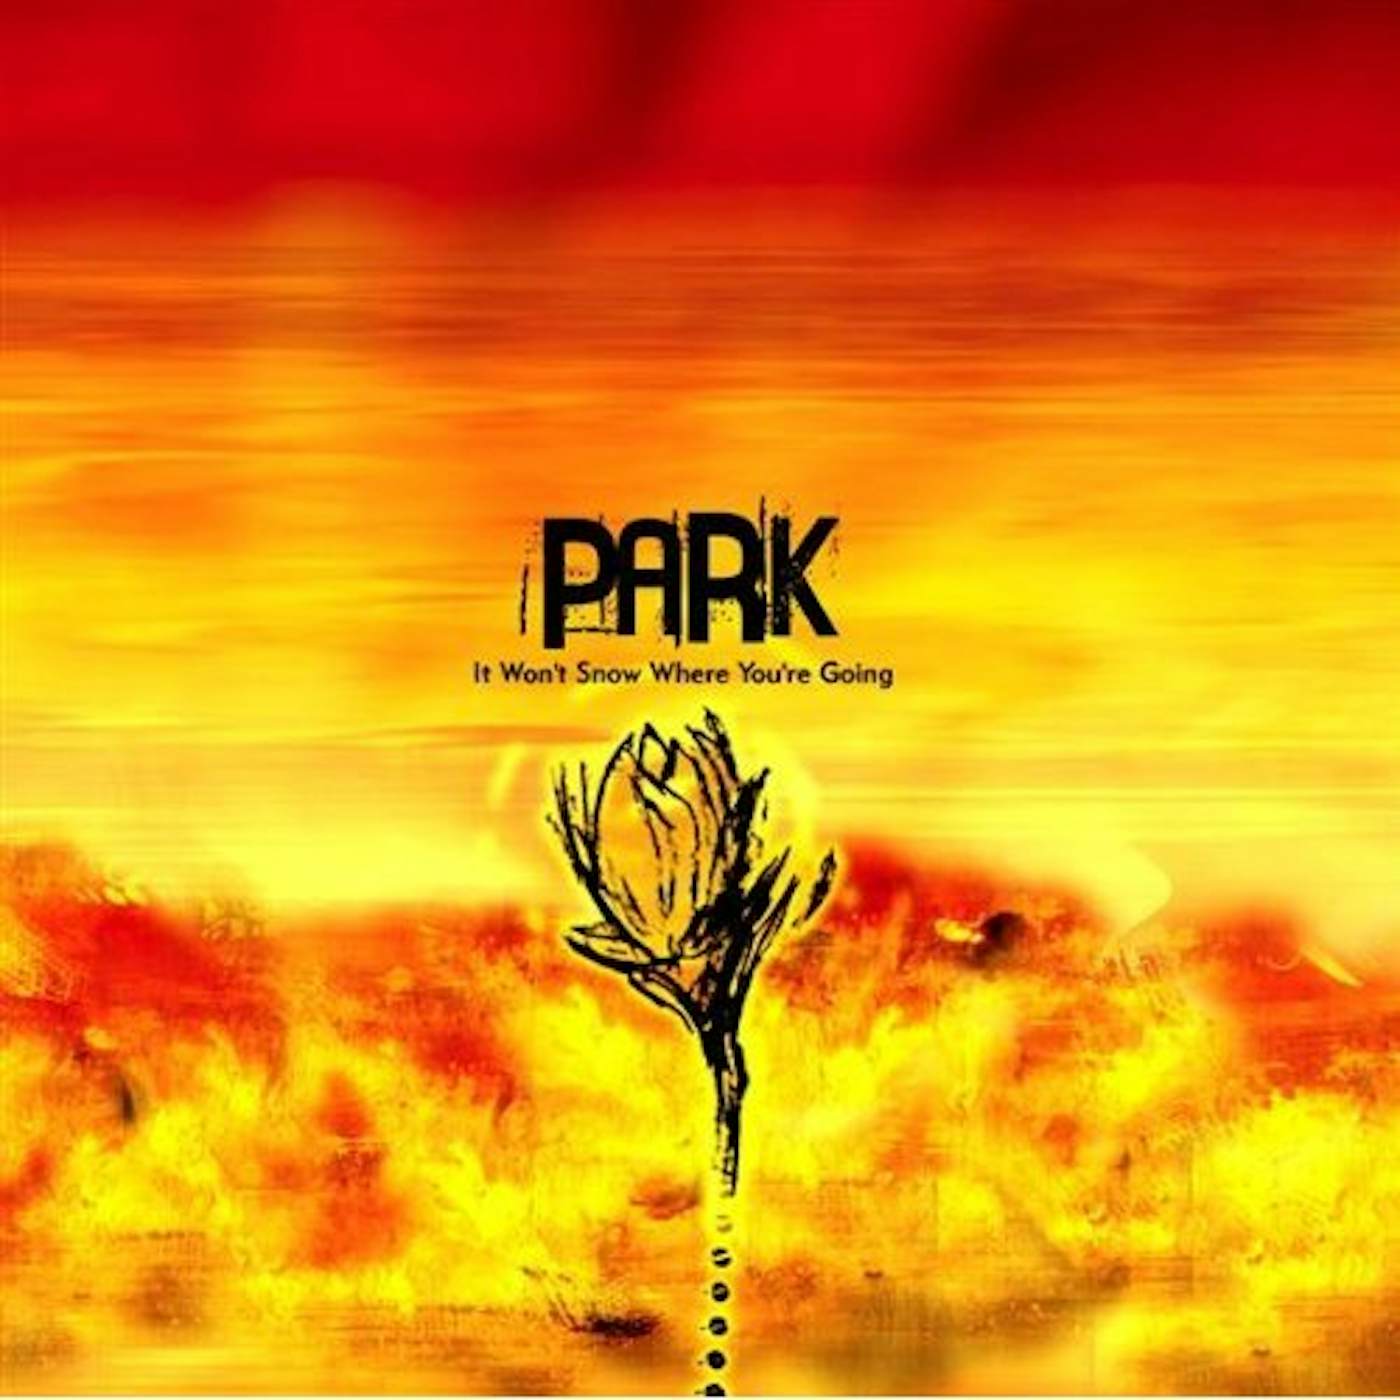 Park IT WON'T SNOW WHERE YOU'RE GOING CD